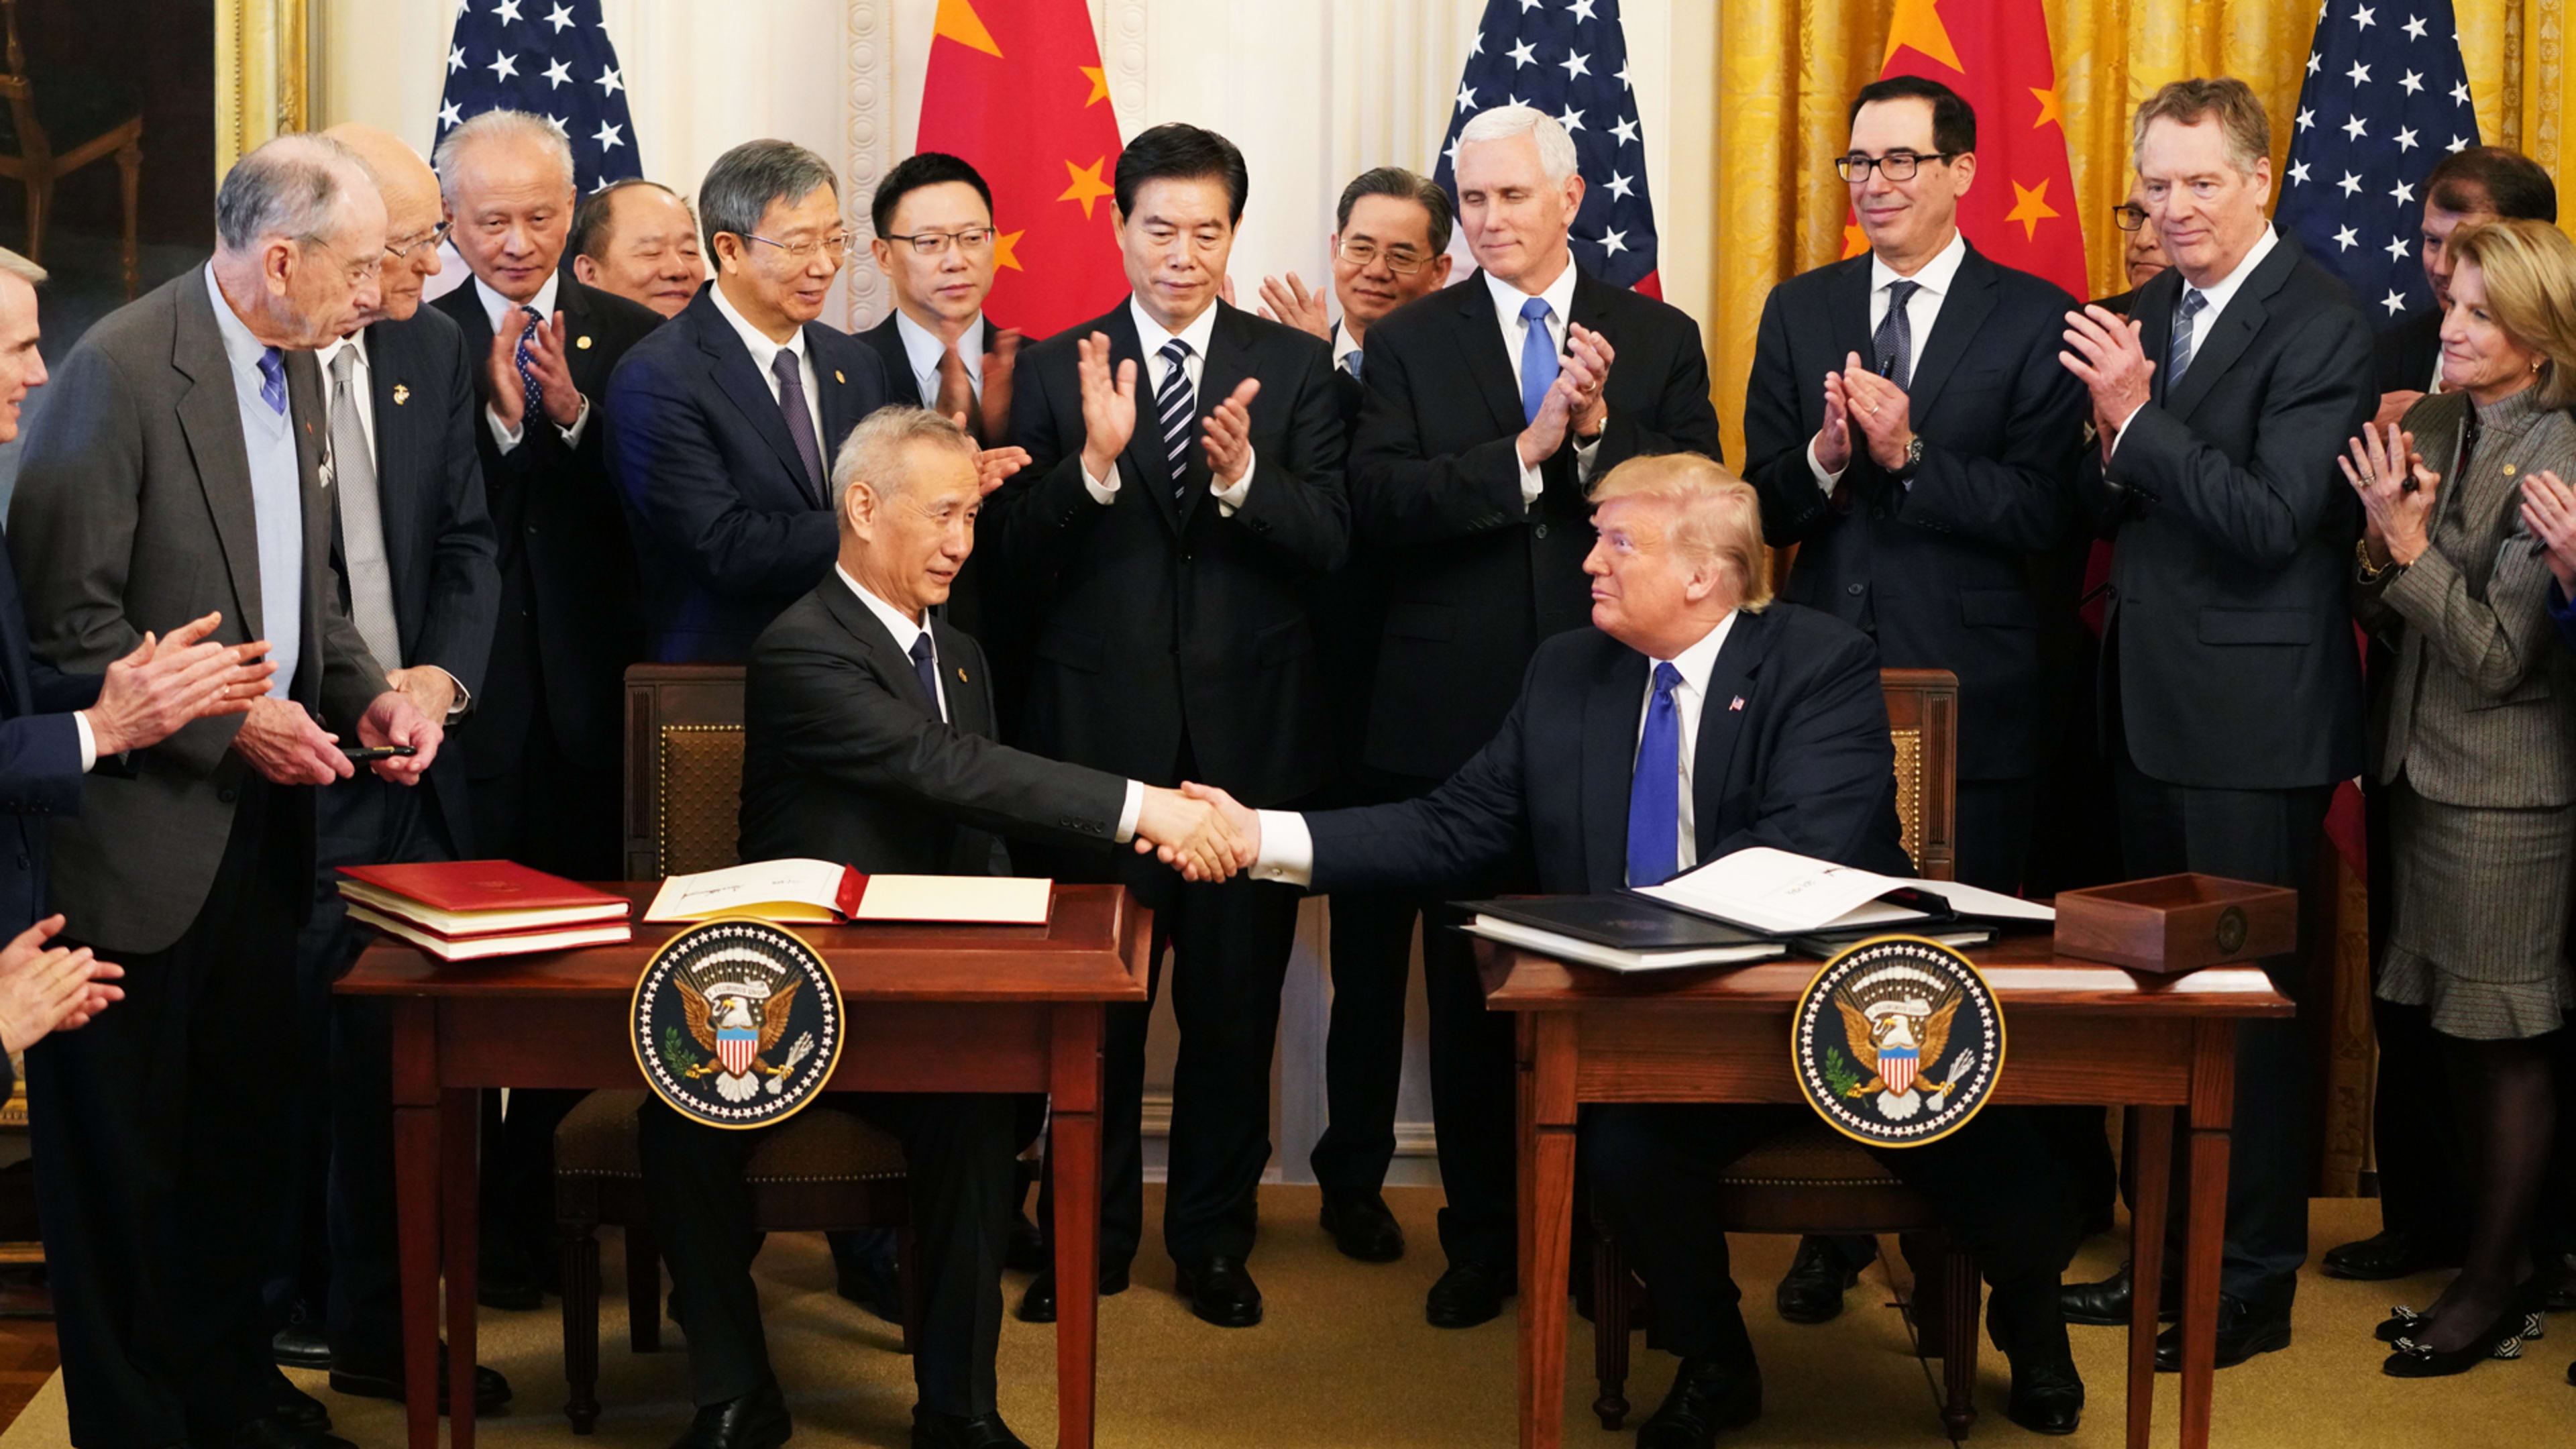 What the new China trade deal really means, according to cybersecurity experts